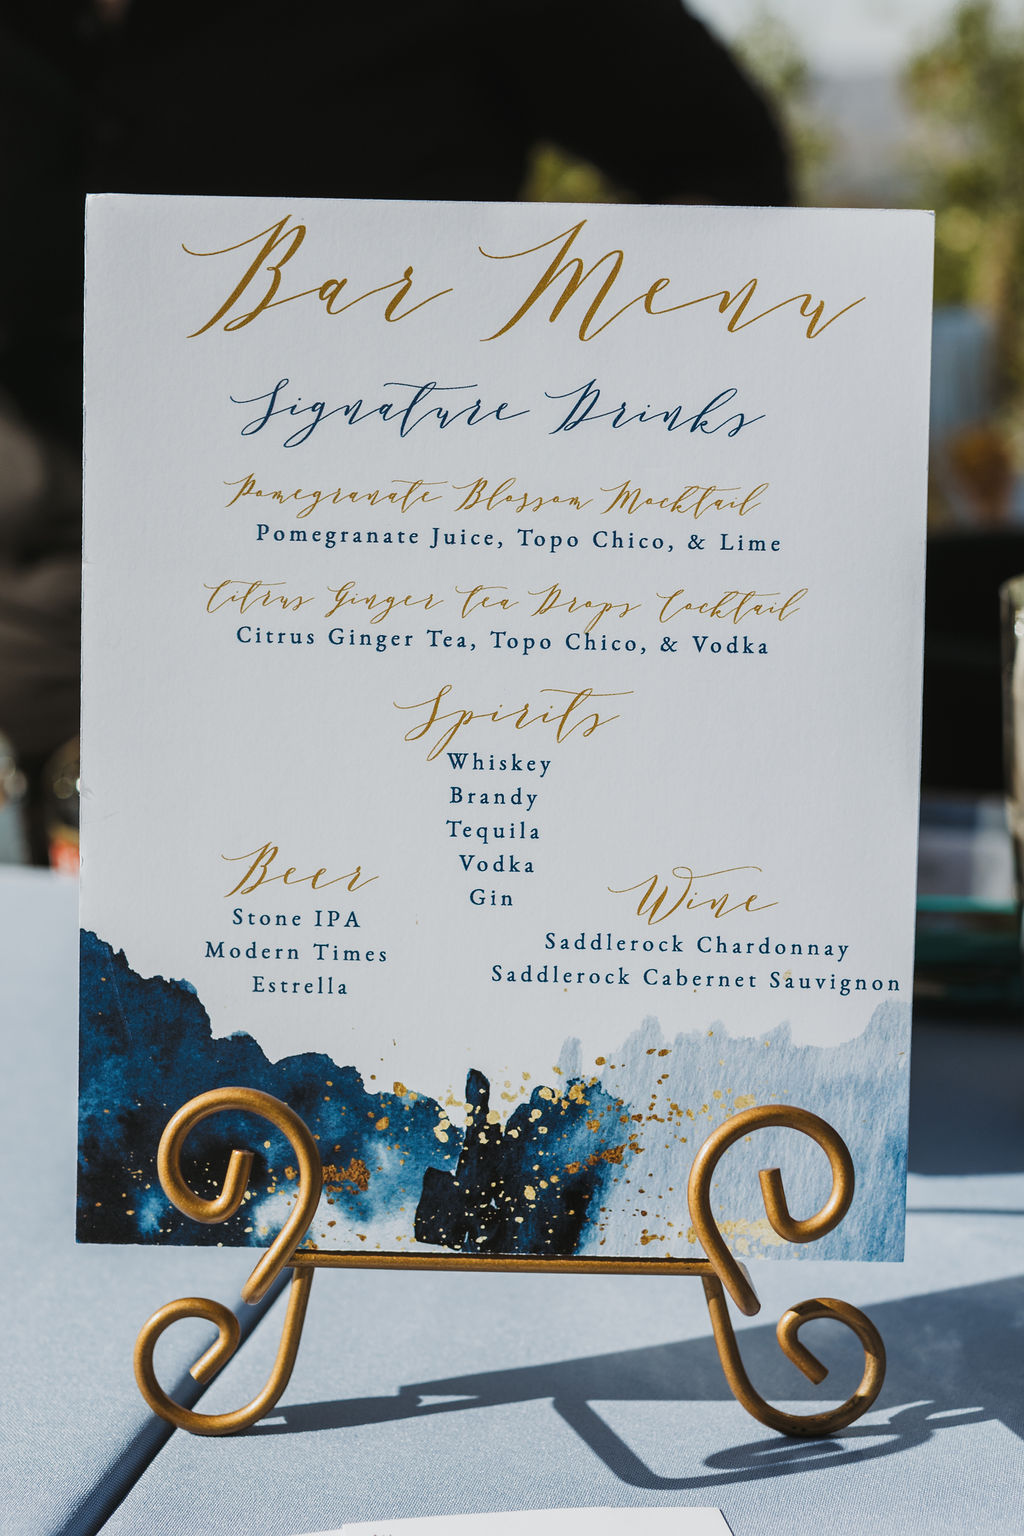 blue and gold bar menu wedding sign during cocktail hour